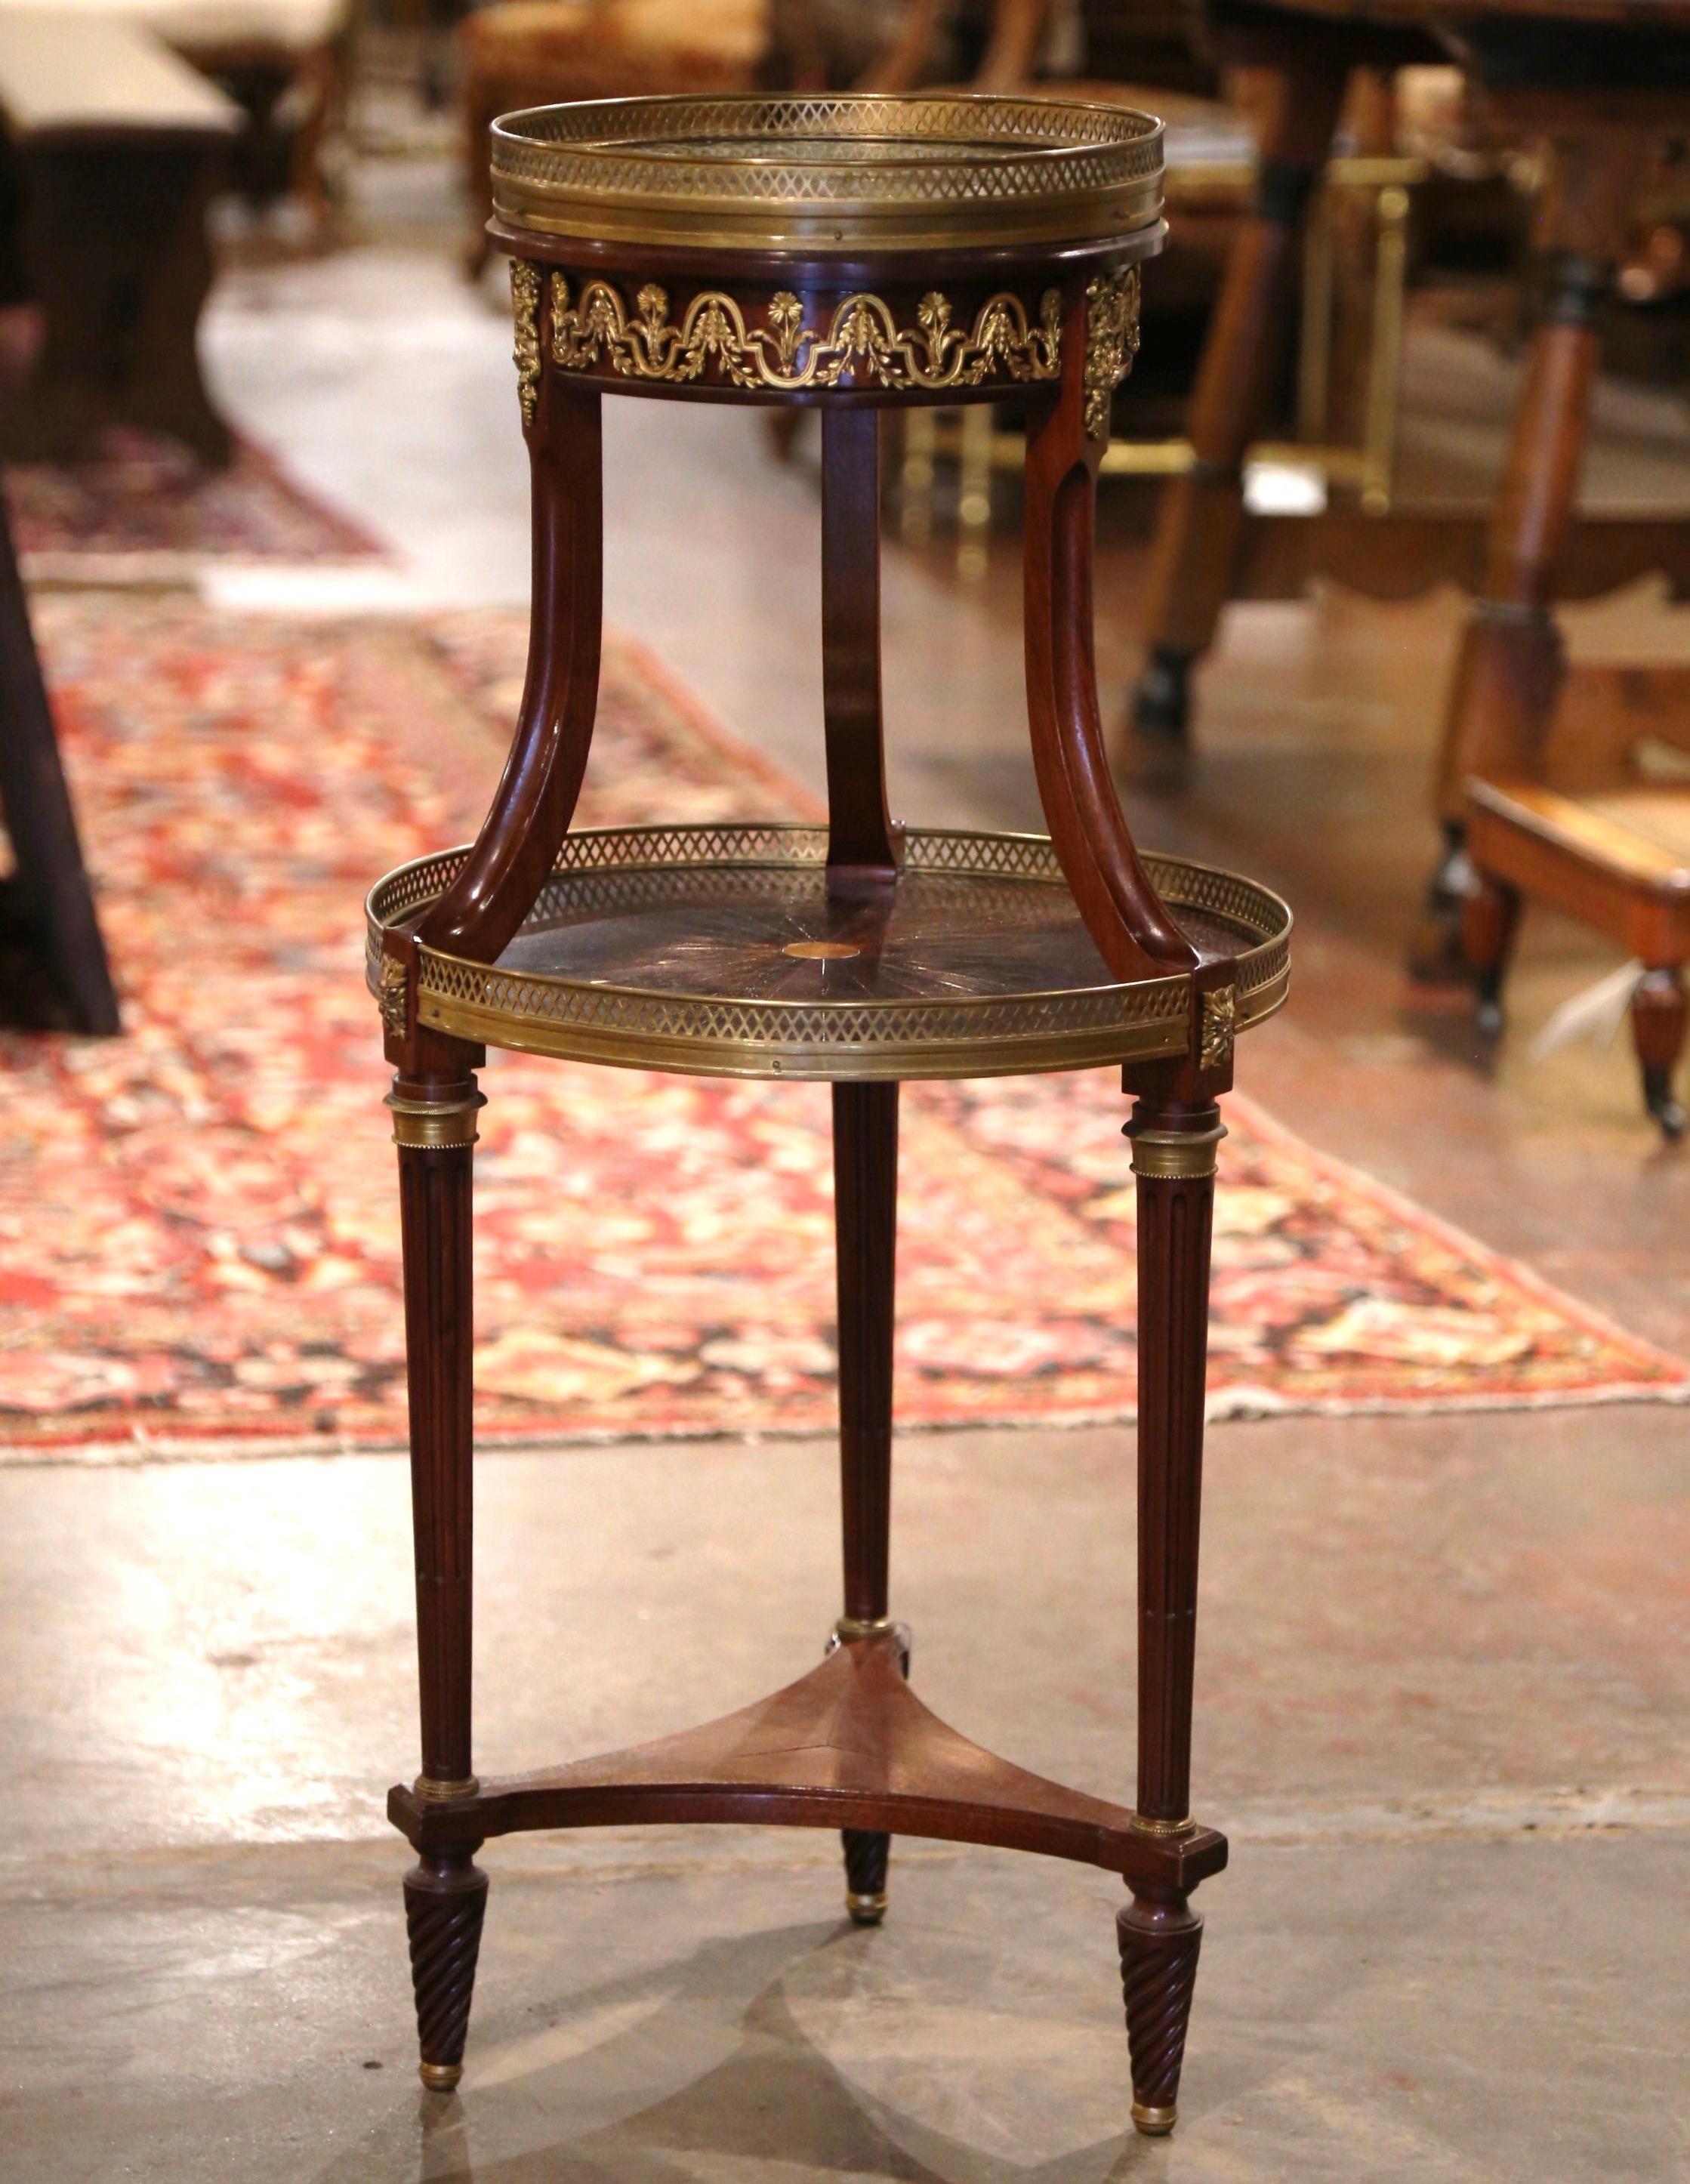 This petite and tall antique two-tier table was crafted in France circa 1880. Standing on three tapered and fluted legs decorated with brass rings and ending twisted feet over a triangle form stretcher, the round bouillotte table is decorated with